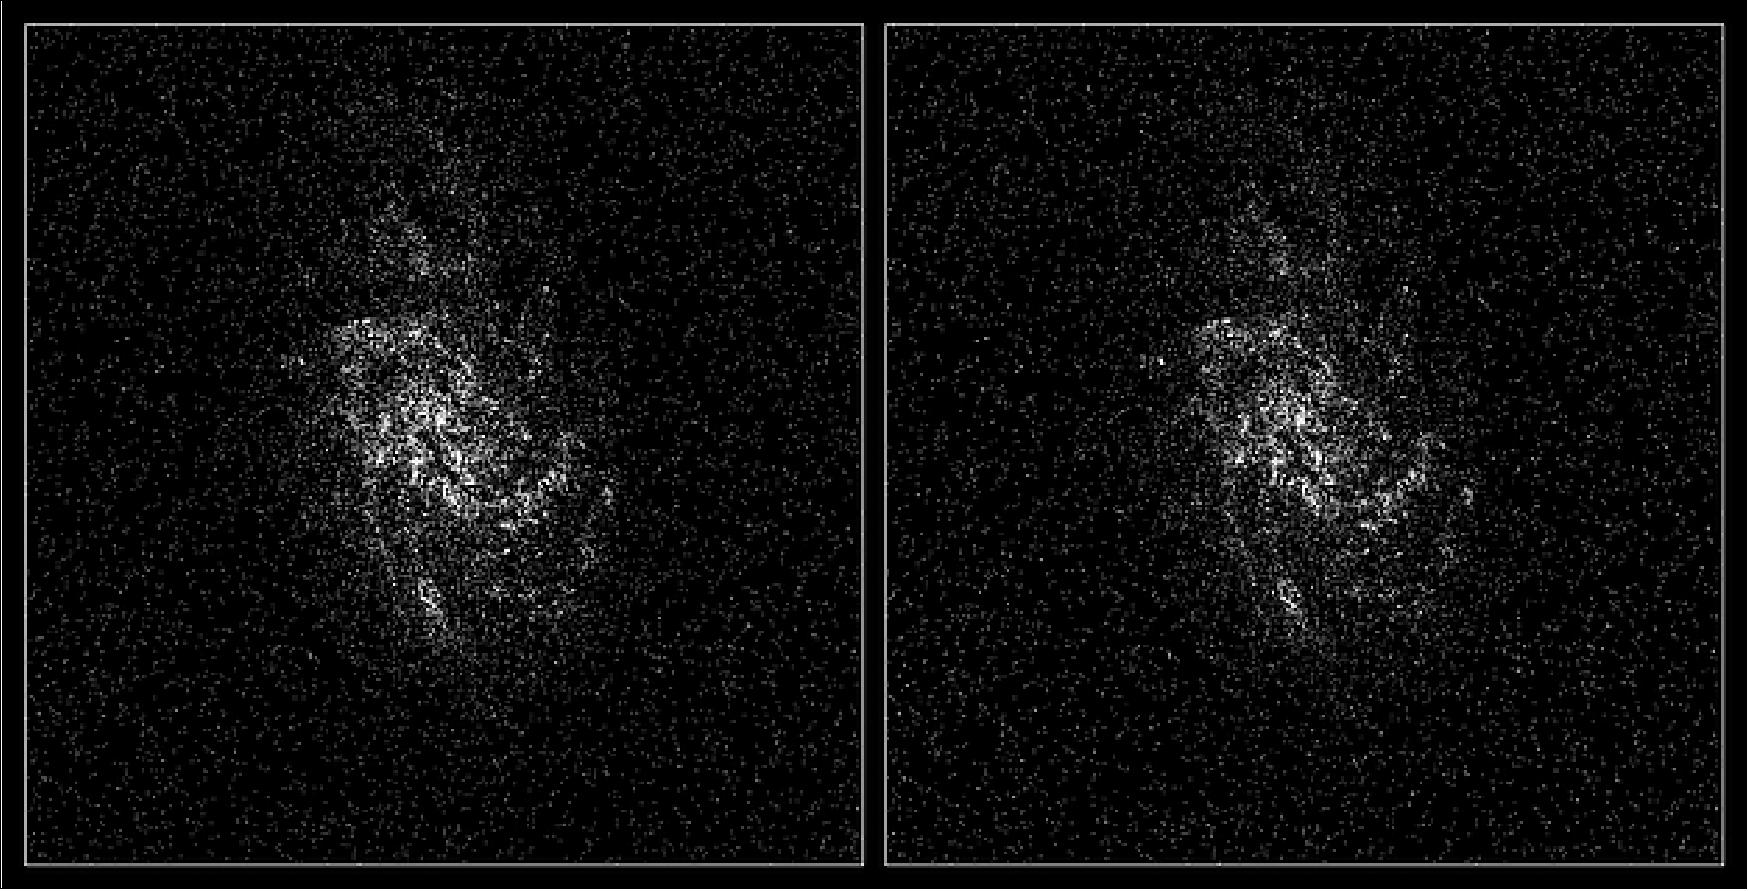 Figure 59: The Triangulum galaxy, or M33, a galactic neighbor to our Milky Way, as viewed by ESA's Gaia satellite after its first 14 months of operations. These views are not photographs but were compiled by mapping the total density of stars (left) and the total amount of radiation, or flux (right), detected by Gaia in each pixel (image credit: ESA/Gaia/DPAC)